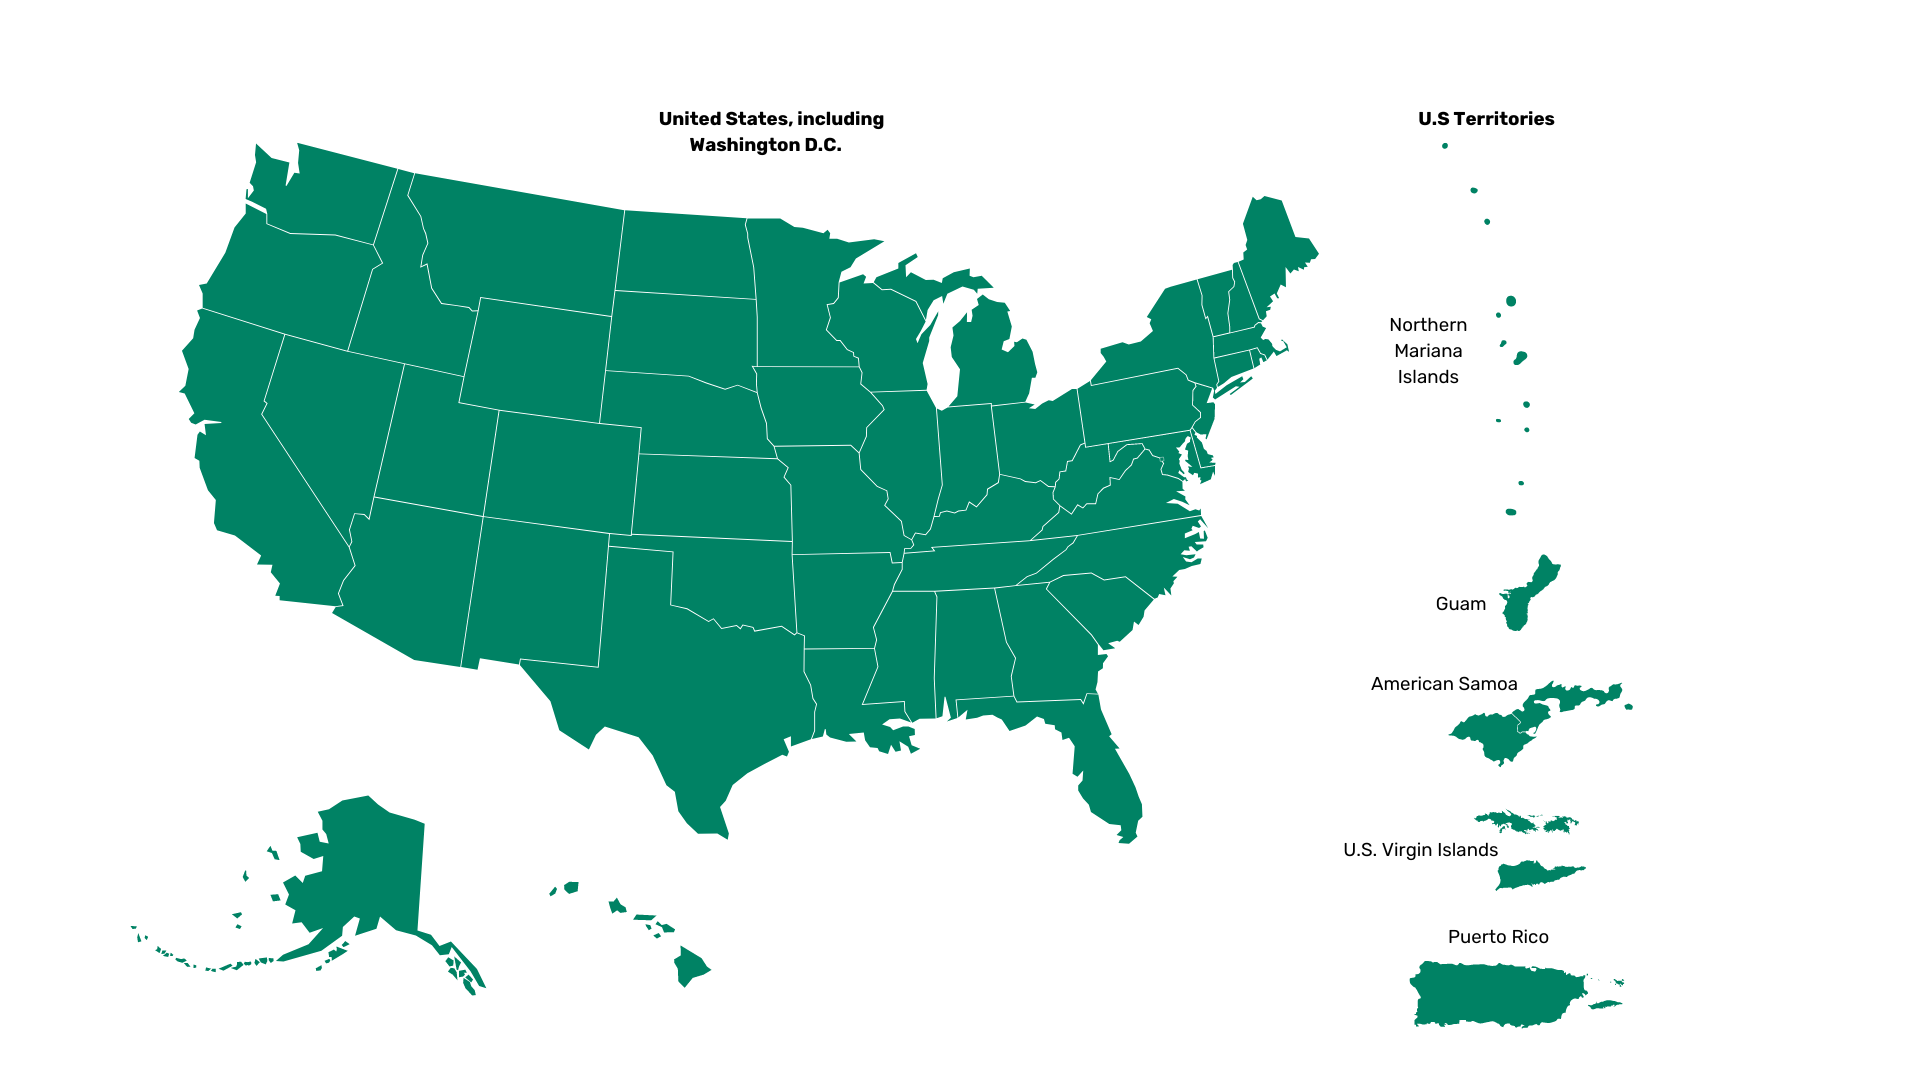 U.S. map with territories